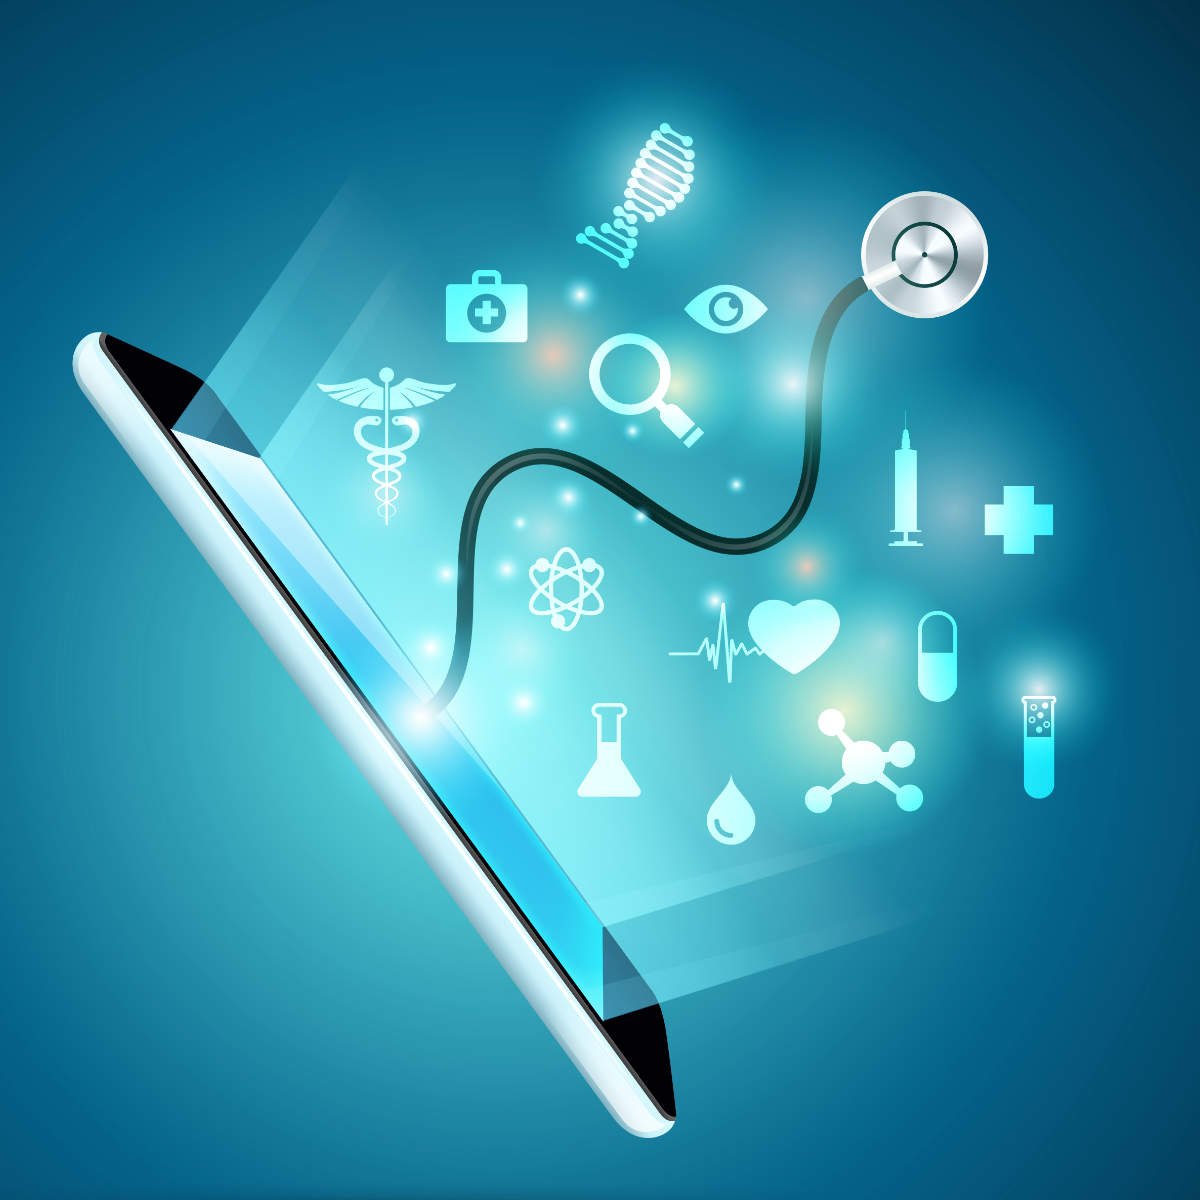 Value of healthcare through technology